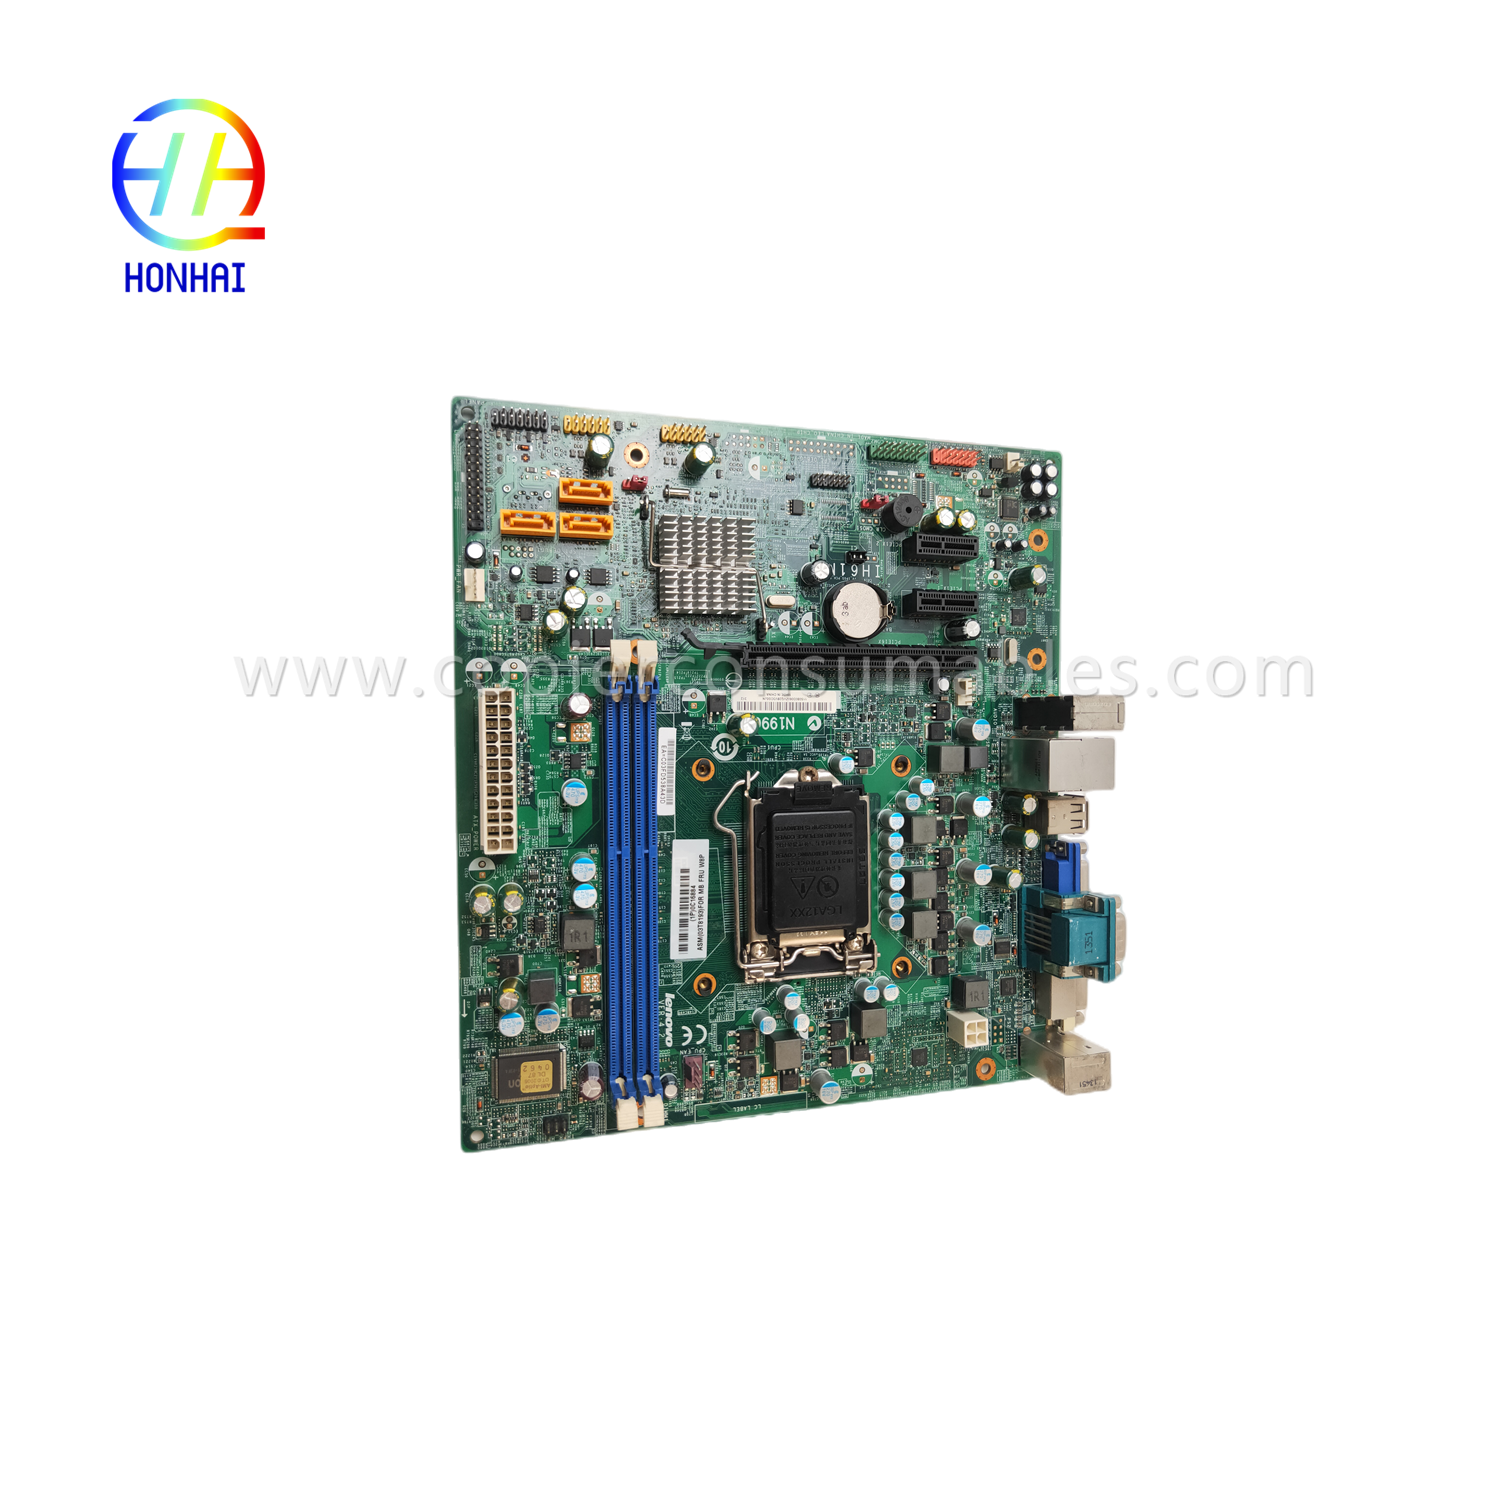 https://c585.goodo.net/motherboard-for-lenovo-thinkcentre-m72e-lga-1155-03t8193-system-board-product/